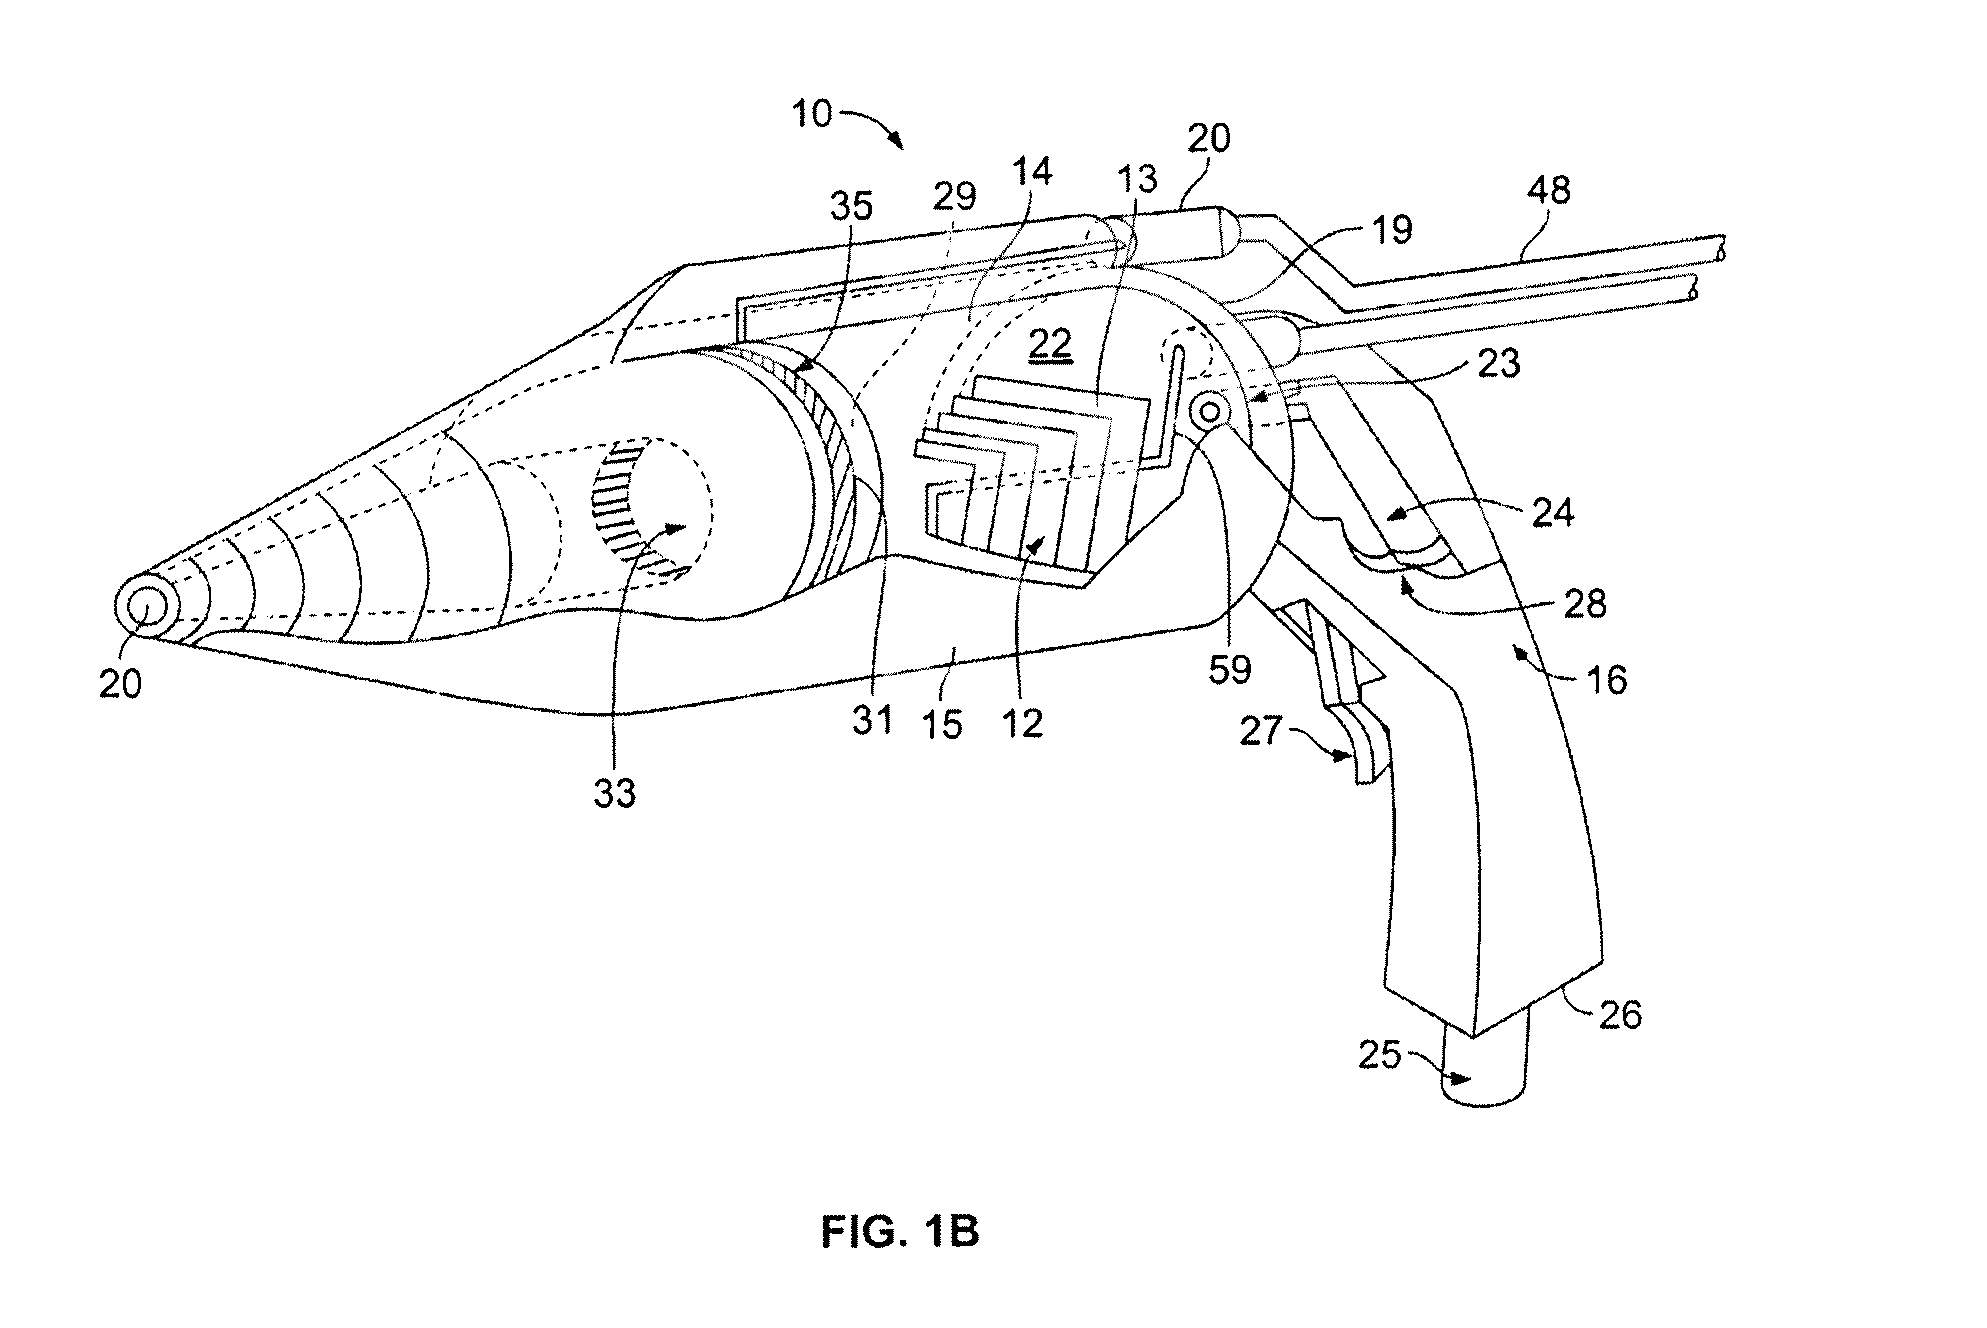 Cold plasma treatment devices and associated methods